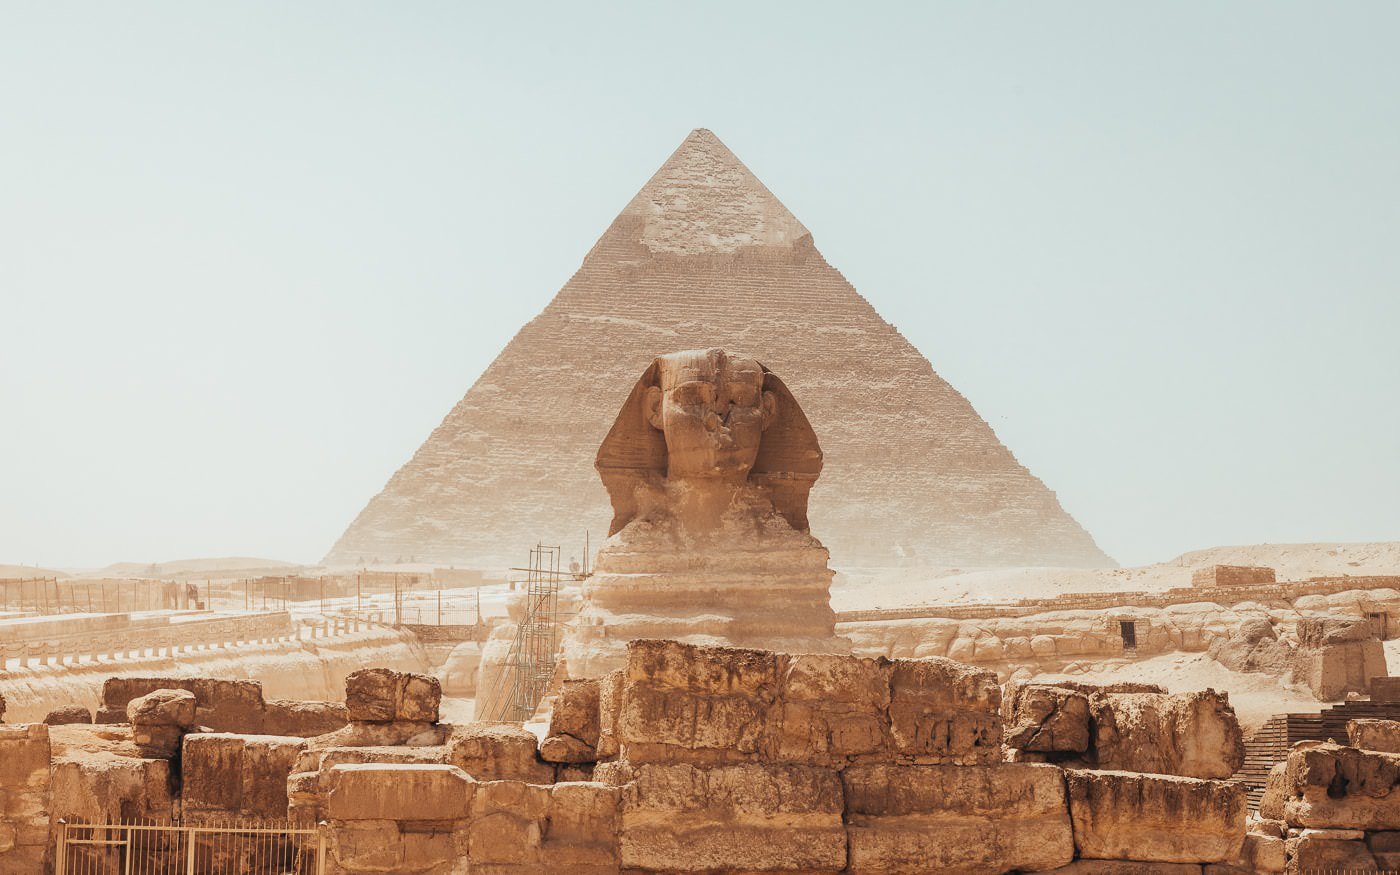 Sphinx and pyramid Egypt destination page